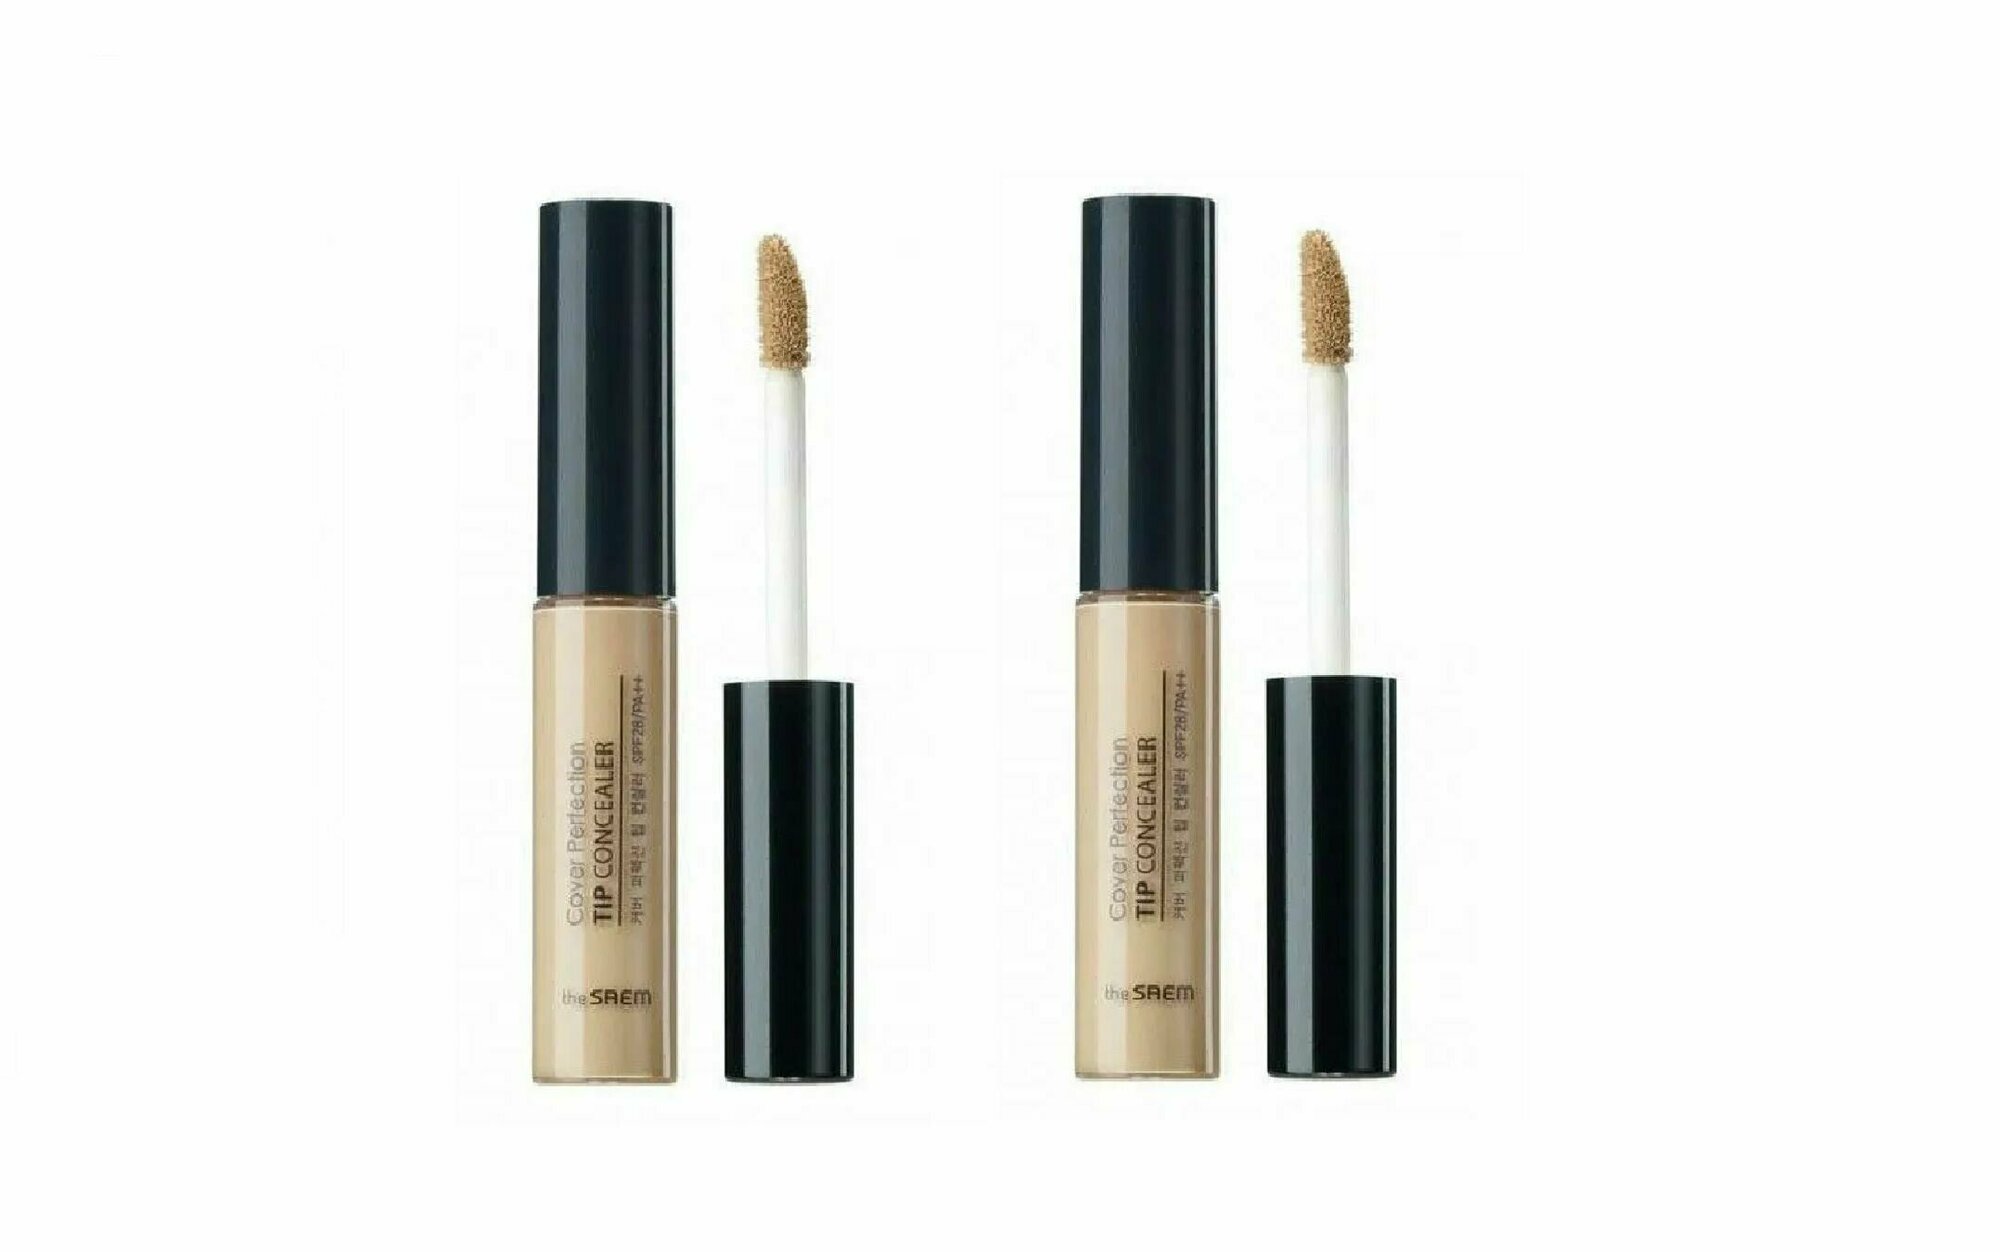 The Saem Консилер для макияжа Cover Perfection Tip Concealer 1.5 Natural Beige, 6,5 гр, 2 шт